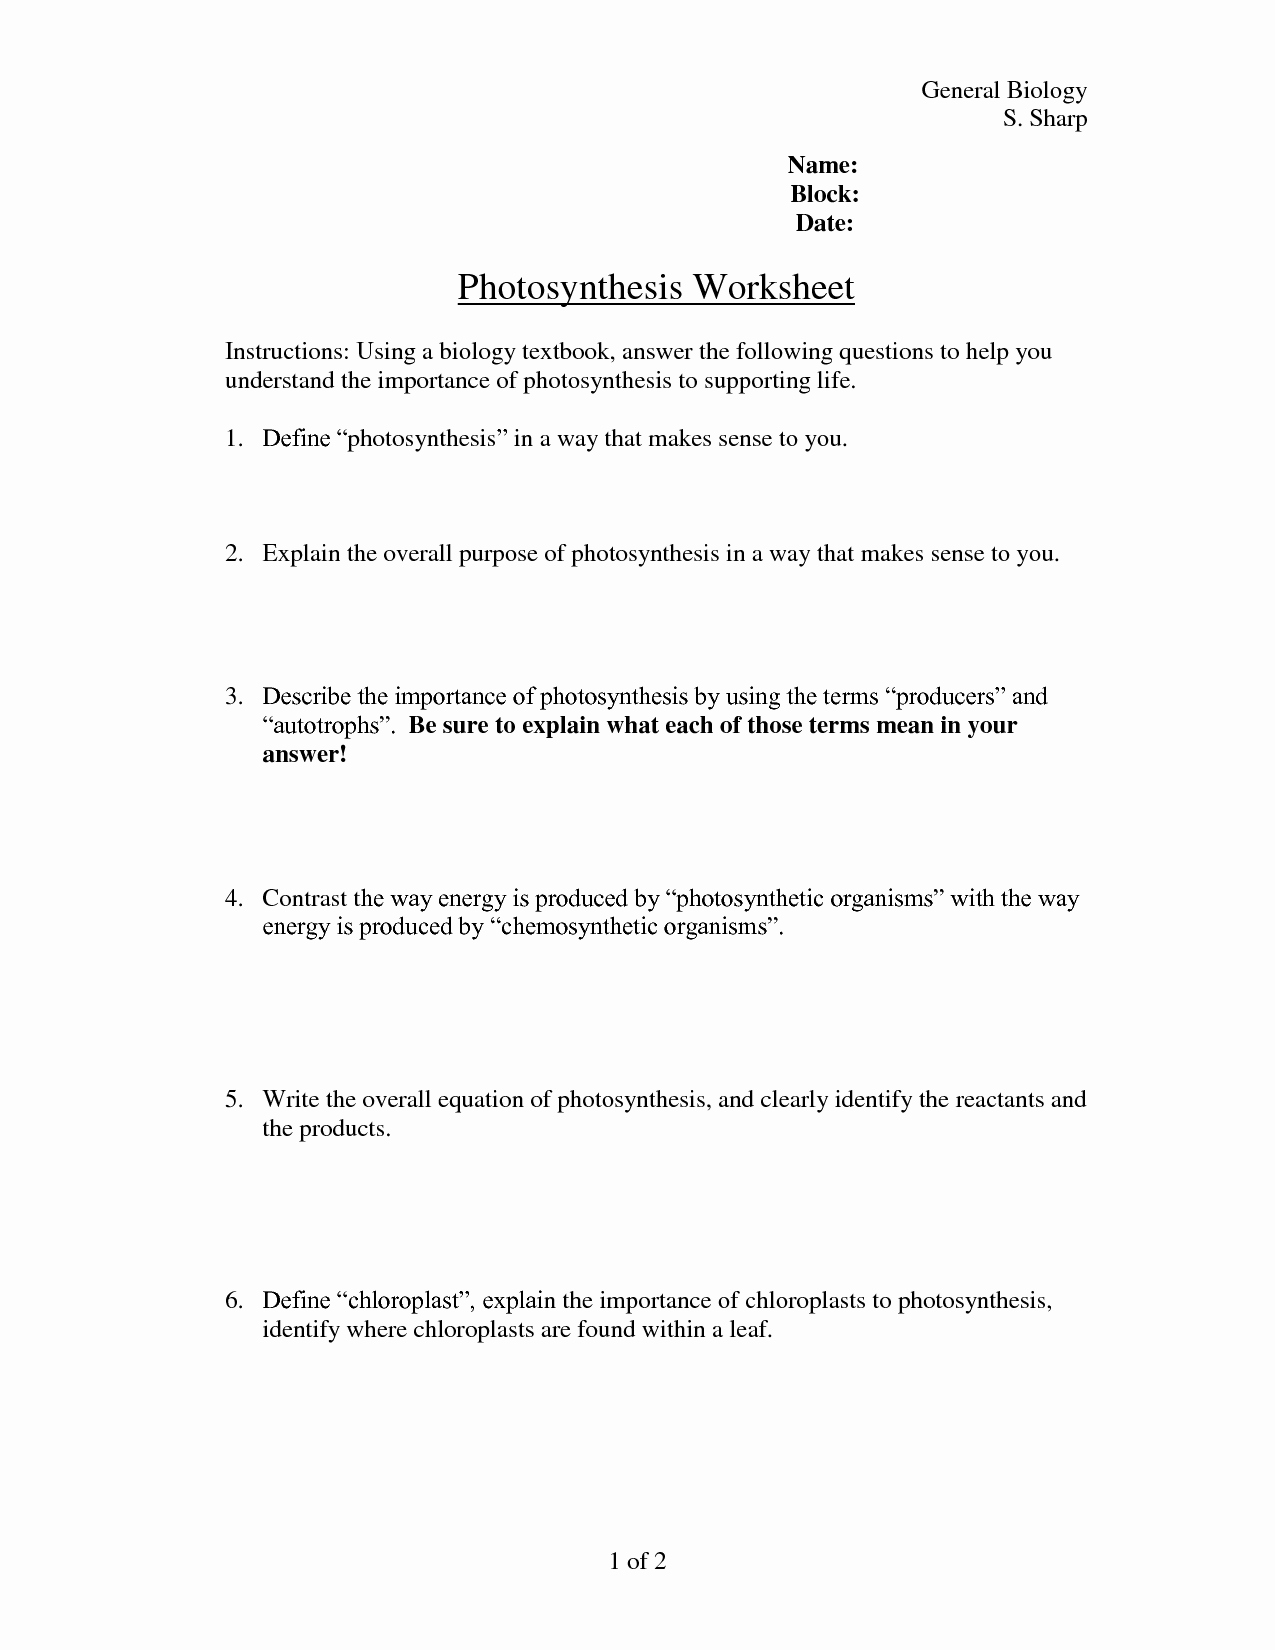 Photosynthesis and Respiration Worksheet Answers Awesome 12 Best Of Synthesis Diagrams Worksheet Answer